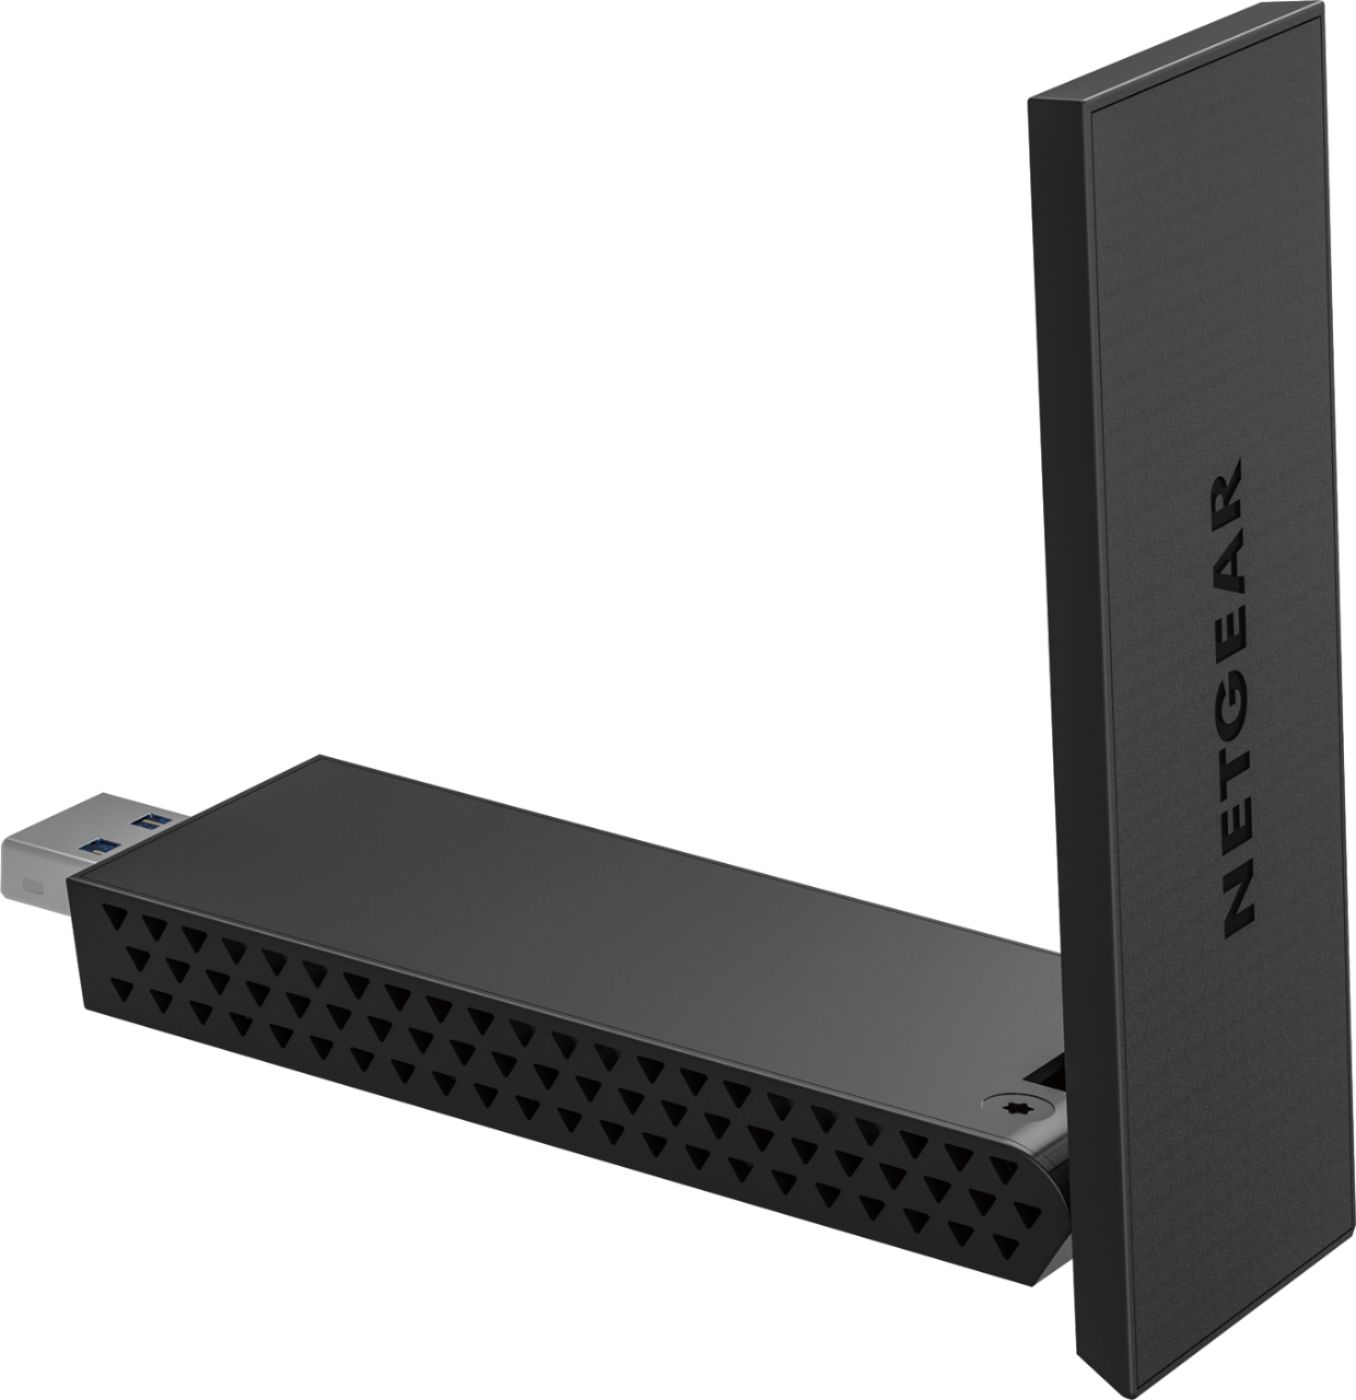 Angle View: Insignia™ - Bluetooth 4.0 USB Adapter for Laptops and Desktops Compatible with Windows 10 - Black